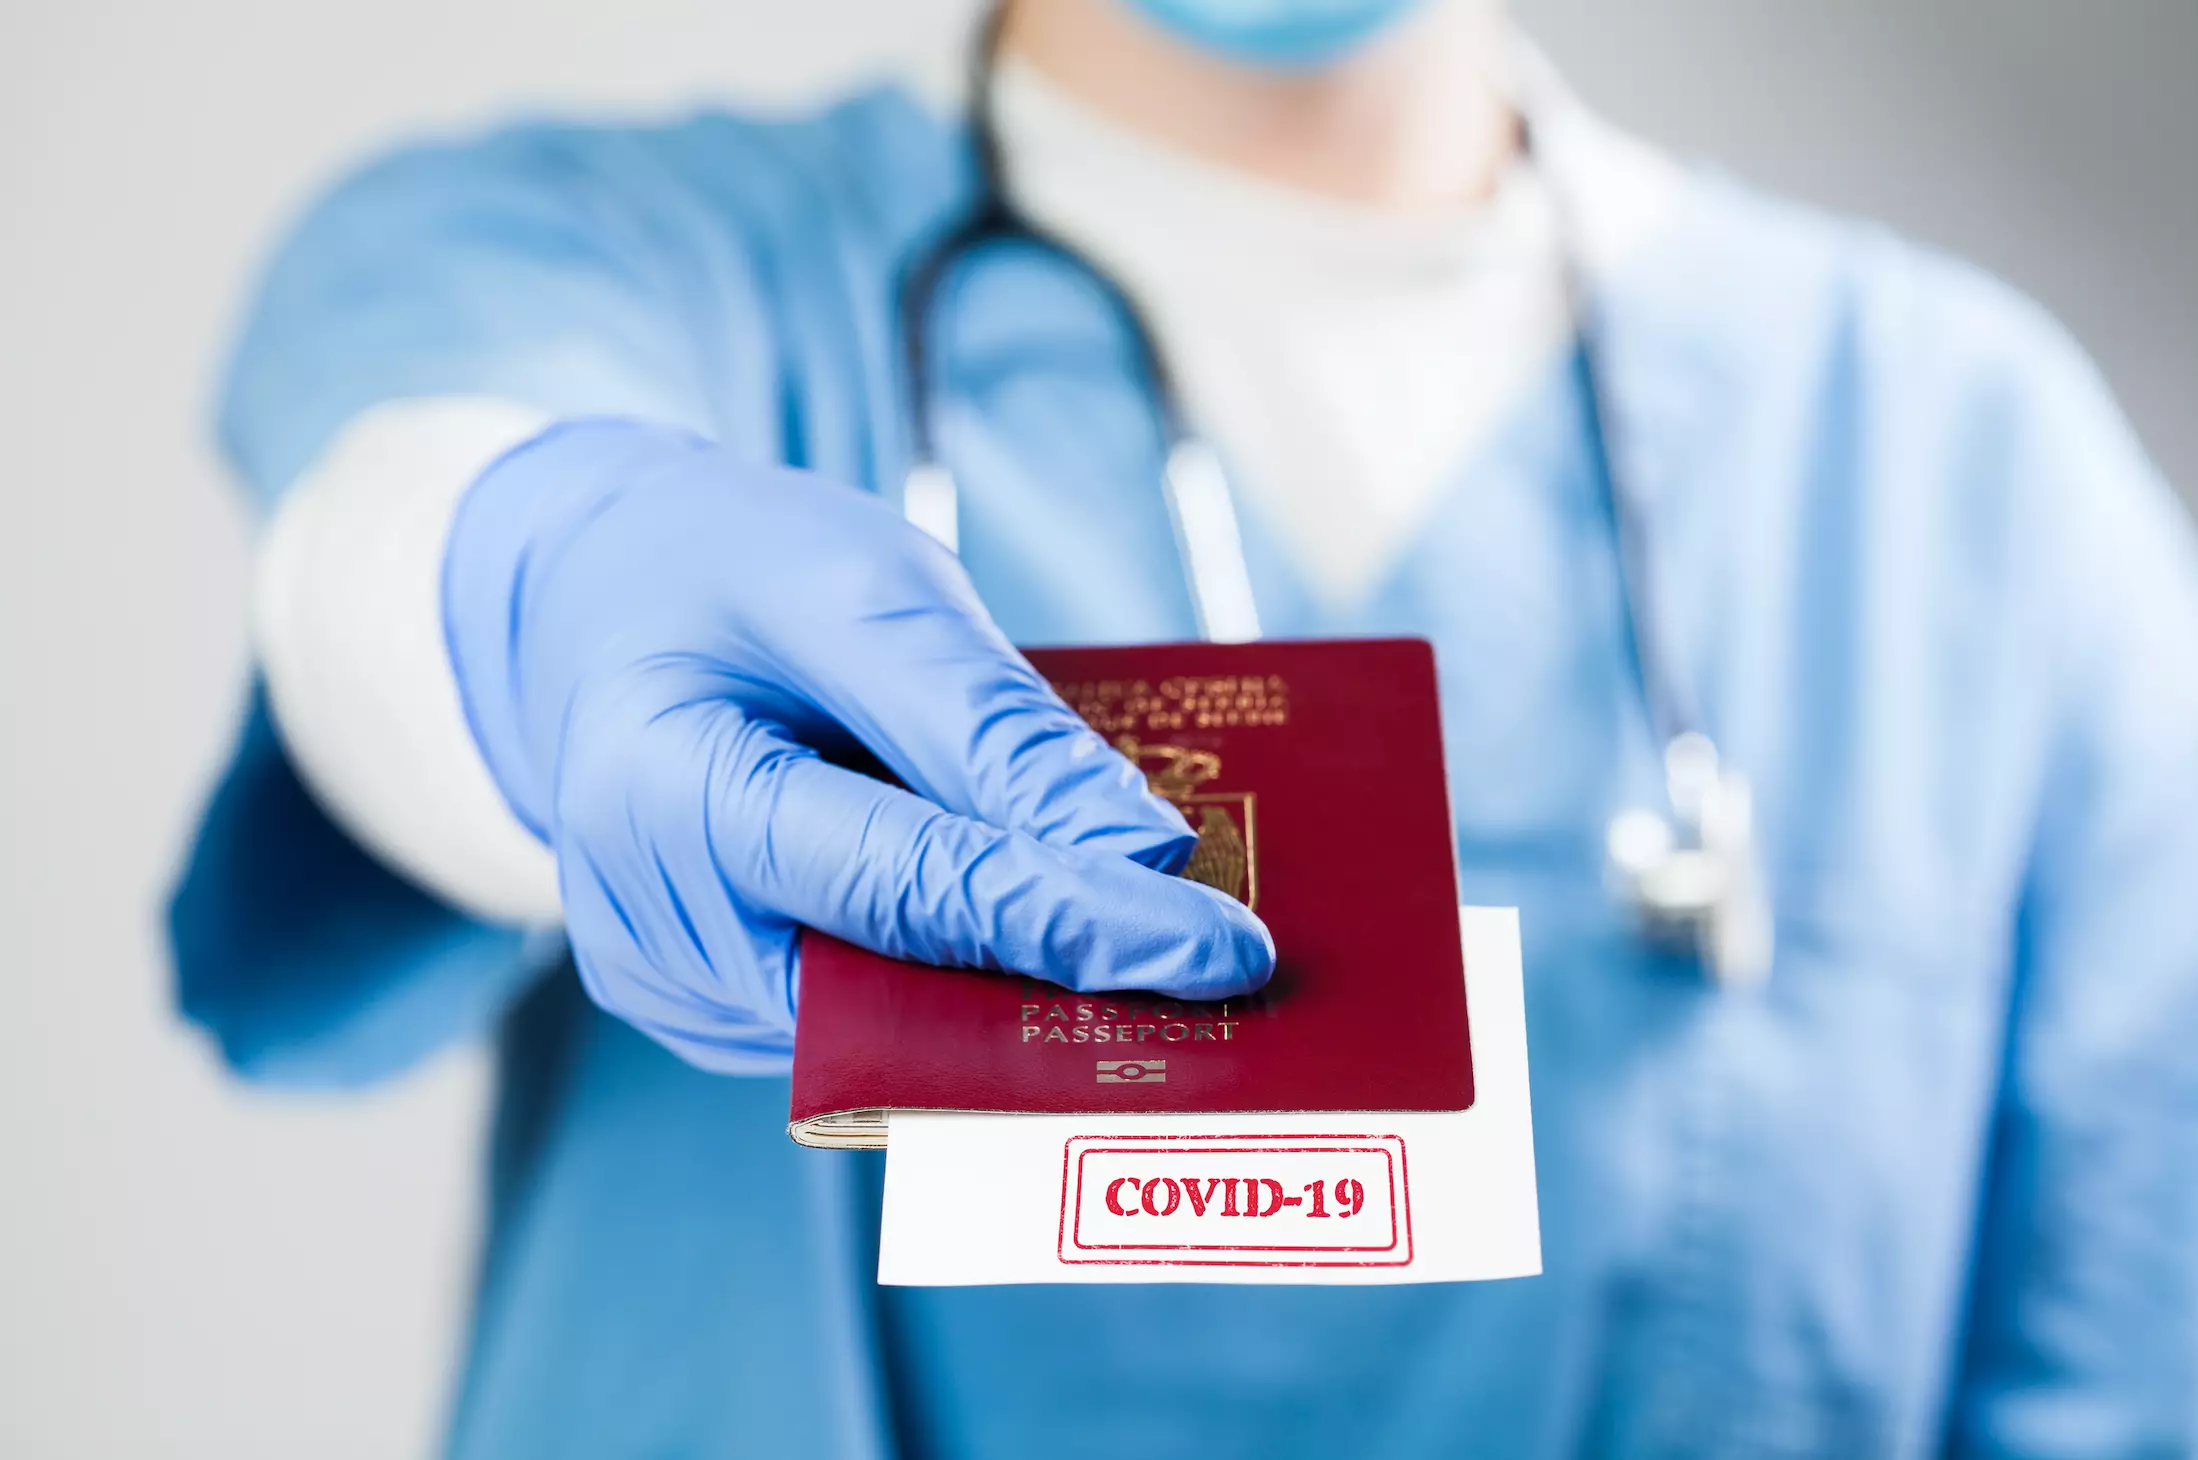 Vaccine minister Nadhim Zahawi has said the UK government has no plans to introduce vaccine passports (